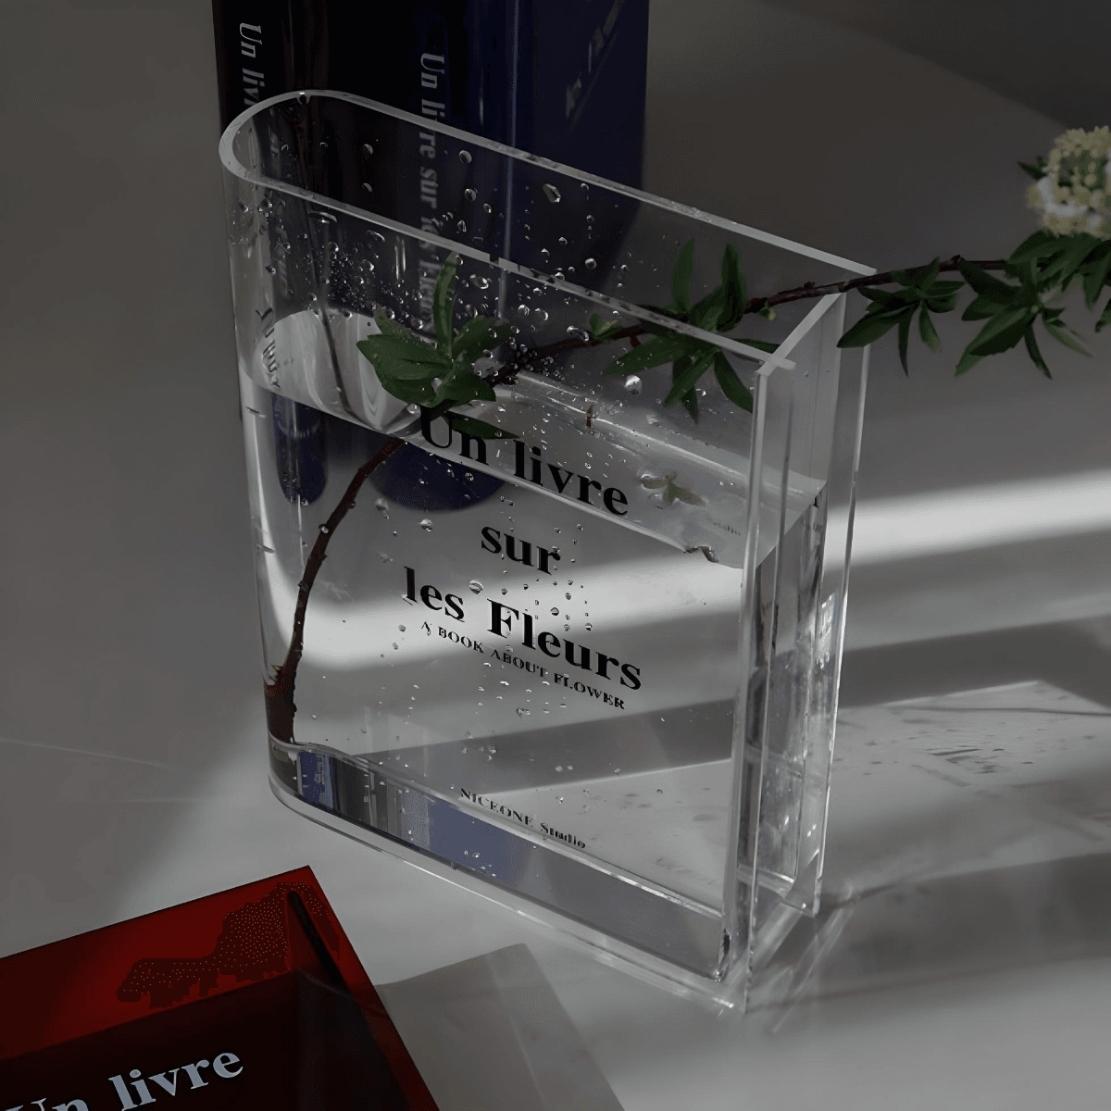 Transparent acrylic book vase with text